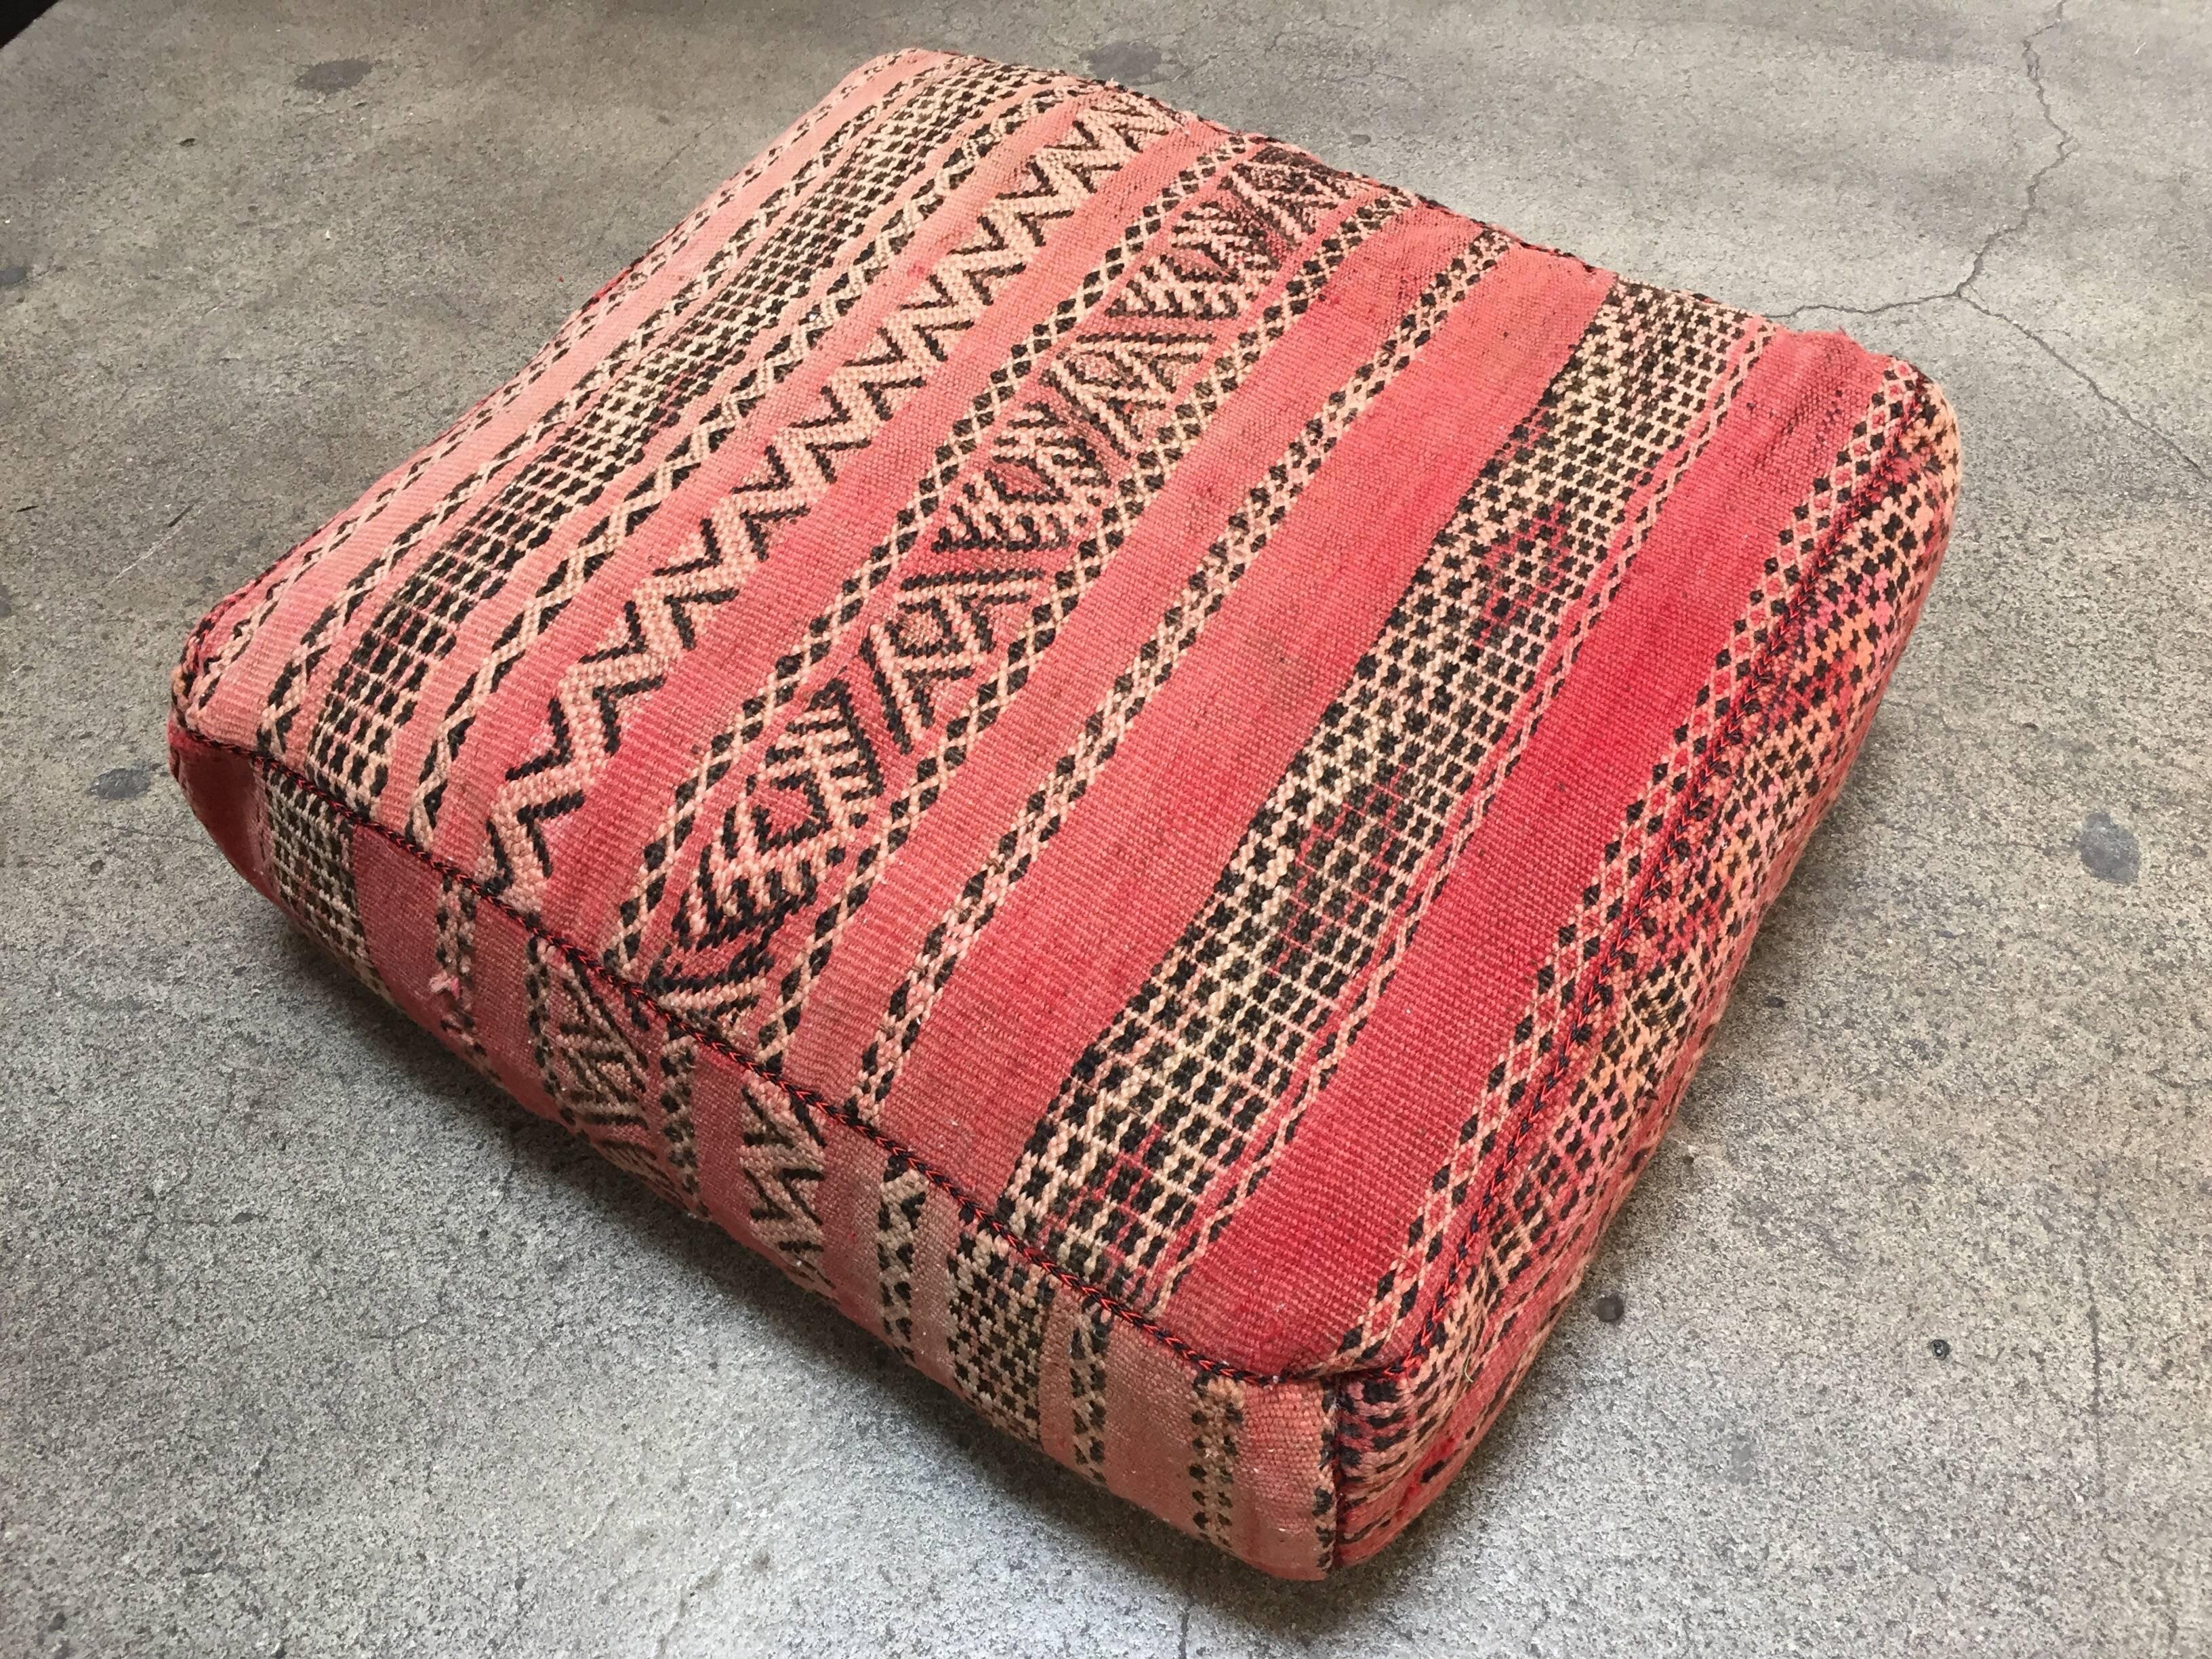 Moroccan vintage floor pillow seat cushion made from a Tribal Berber rug.
Square shape with nice faded earth tone colors for the top and rich warm stripes colors for the bottom.
Great addition for any Bohemian or Modern interior.
Made from a